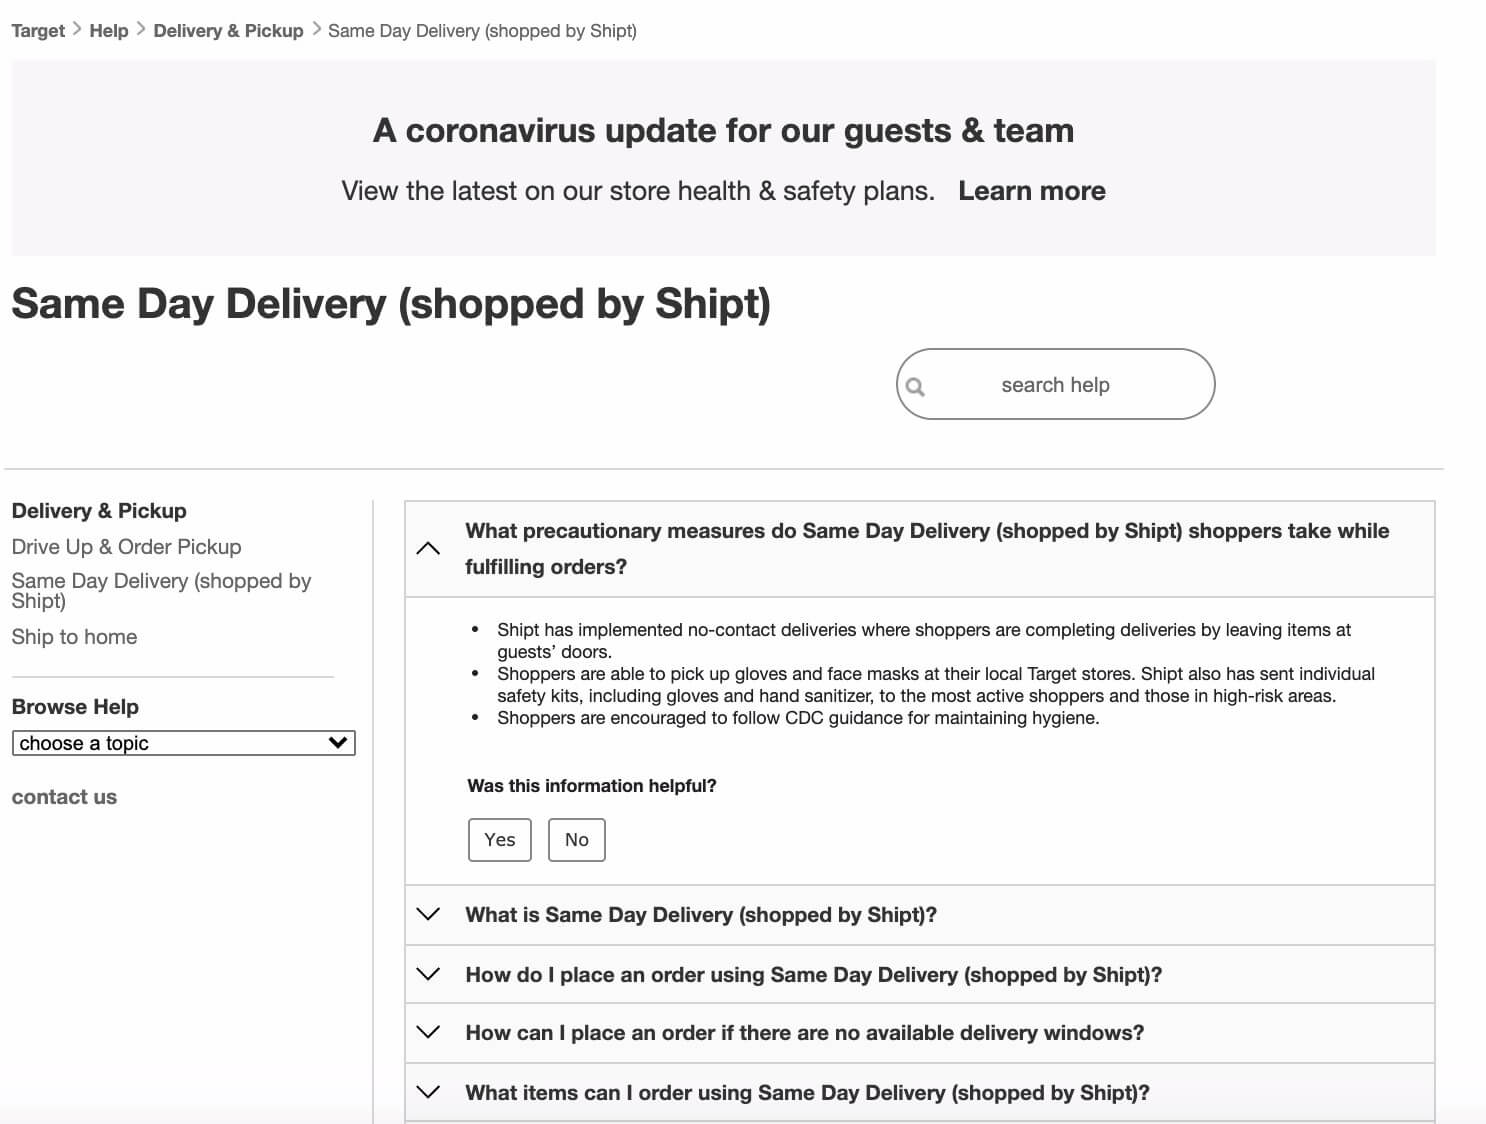 Screenshot of Shipt delivery (acquired by Target)